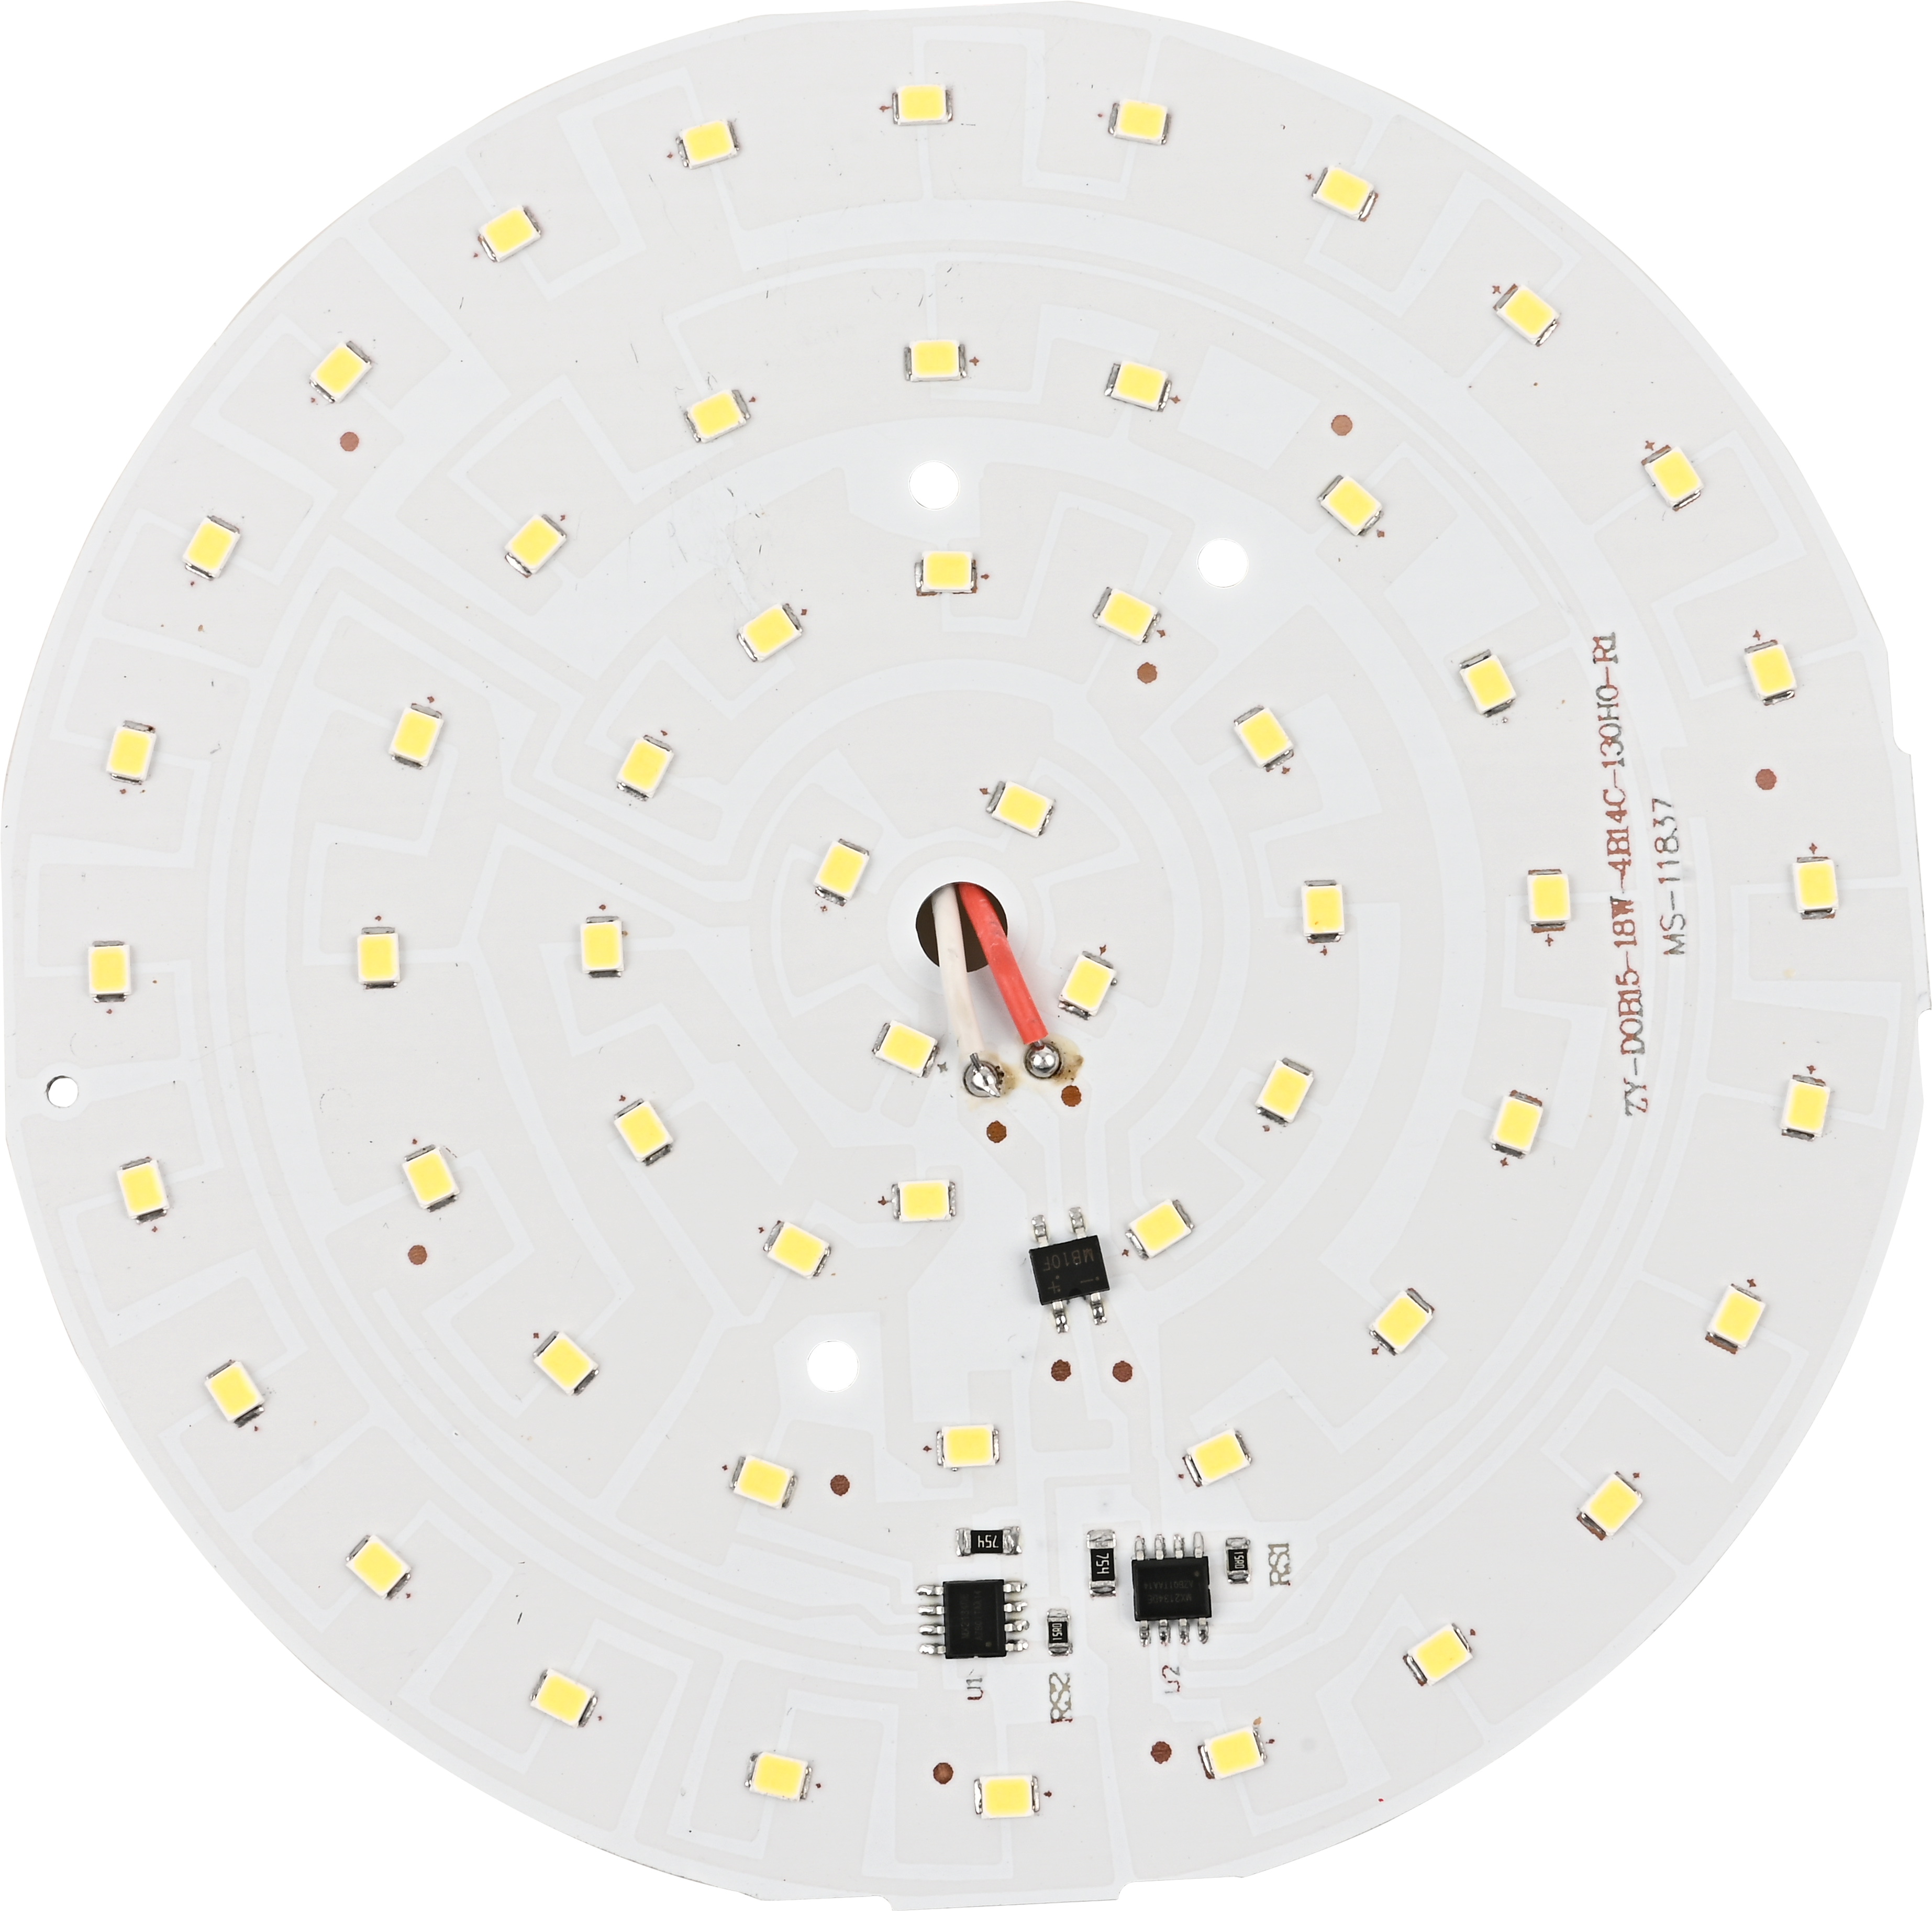 ZUOYOU LINEAR DOB PANEL LIGHT ROUND&SQUARE